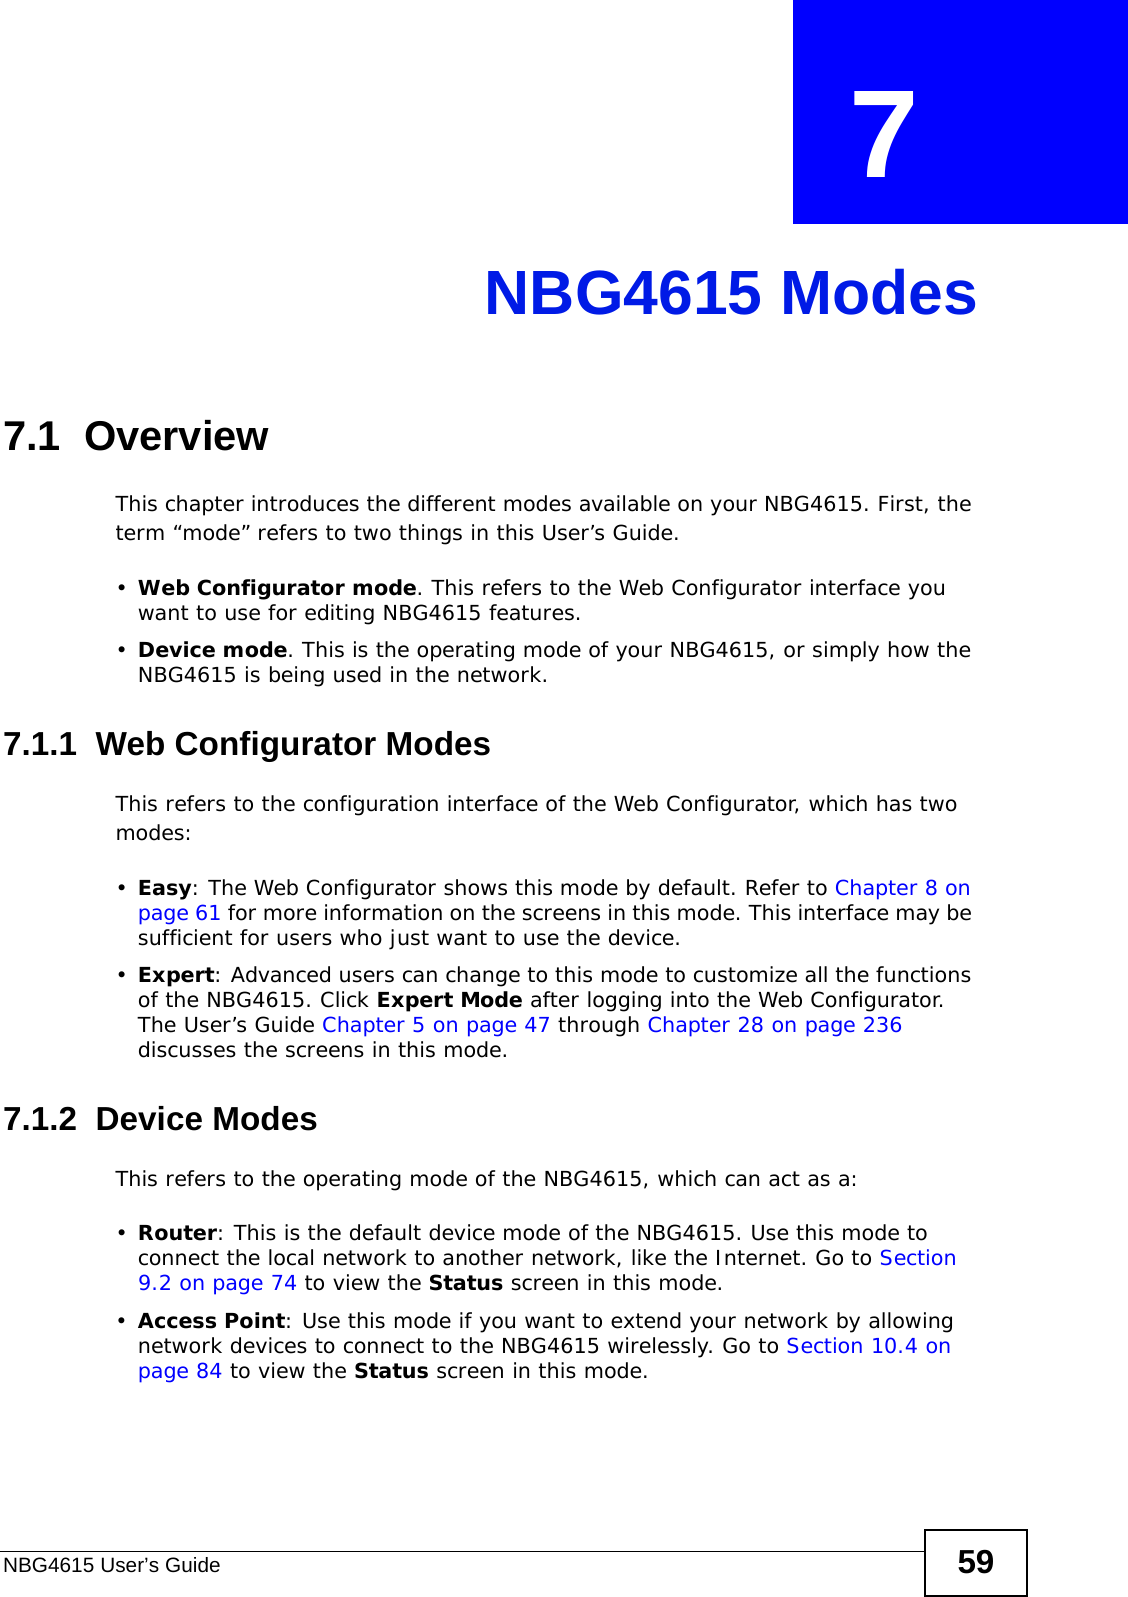 NBG4615 User’s Guide 59CHAPTER  7 NBG4615 Modes7.1  OverviewThis chapter introduces the different modes available on your NBG4615. First, the term “mode” refers to two things in this User’s Guide.•Web Configurator mode. This refers to the Web Configurator interface you want to use for editing NBG4615 features. •Device mode. This is the operating mode of your NBG4615, or simply how the NBG4615 is being used in the network. 7.1.1  Web Configurator ModesThis refers to the configuration interface of the Web Configurator, which has two modes:•Easy: The Web Configurator shows this mode by default. Refer to Chapter 8 on page 61 for more information on the screens in this mode. This interface may be sufficient for users who just want to use the device.•Expert: Advanced users can change to this mode to customize all the functions of the NBG4615. Click Expert Mode after logging into the Web Configurator. The User’s Guide Chapter 5 on page 47 through Chapter 28 on page 236 discusses the screens in this mode.7.1.2  Device ModesThis refers to the operating mode of the NBG4615, which can act as a:•Router: This is the default device mode of the NBG4615. Use this mode to connect the local network to another network, like the Internet. Go to Section 9.2 on page 74 to view the Status screen in this mode.•Access Point: Use this mode if you want to extend your network by allowing network devices to connect to the NBG4615 wirelessly. Go to Section 10.4 on page 84 to view the Status screen in this mode.